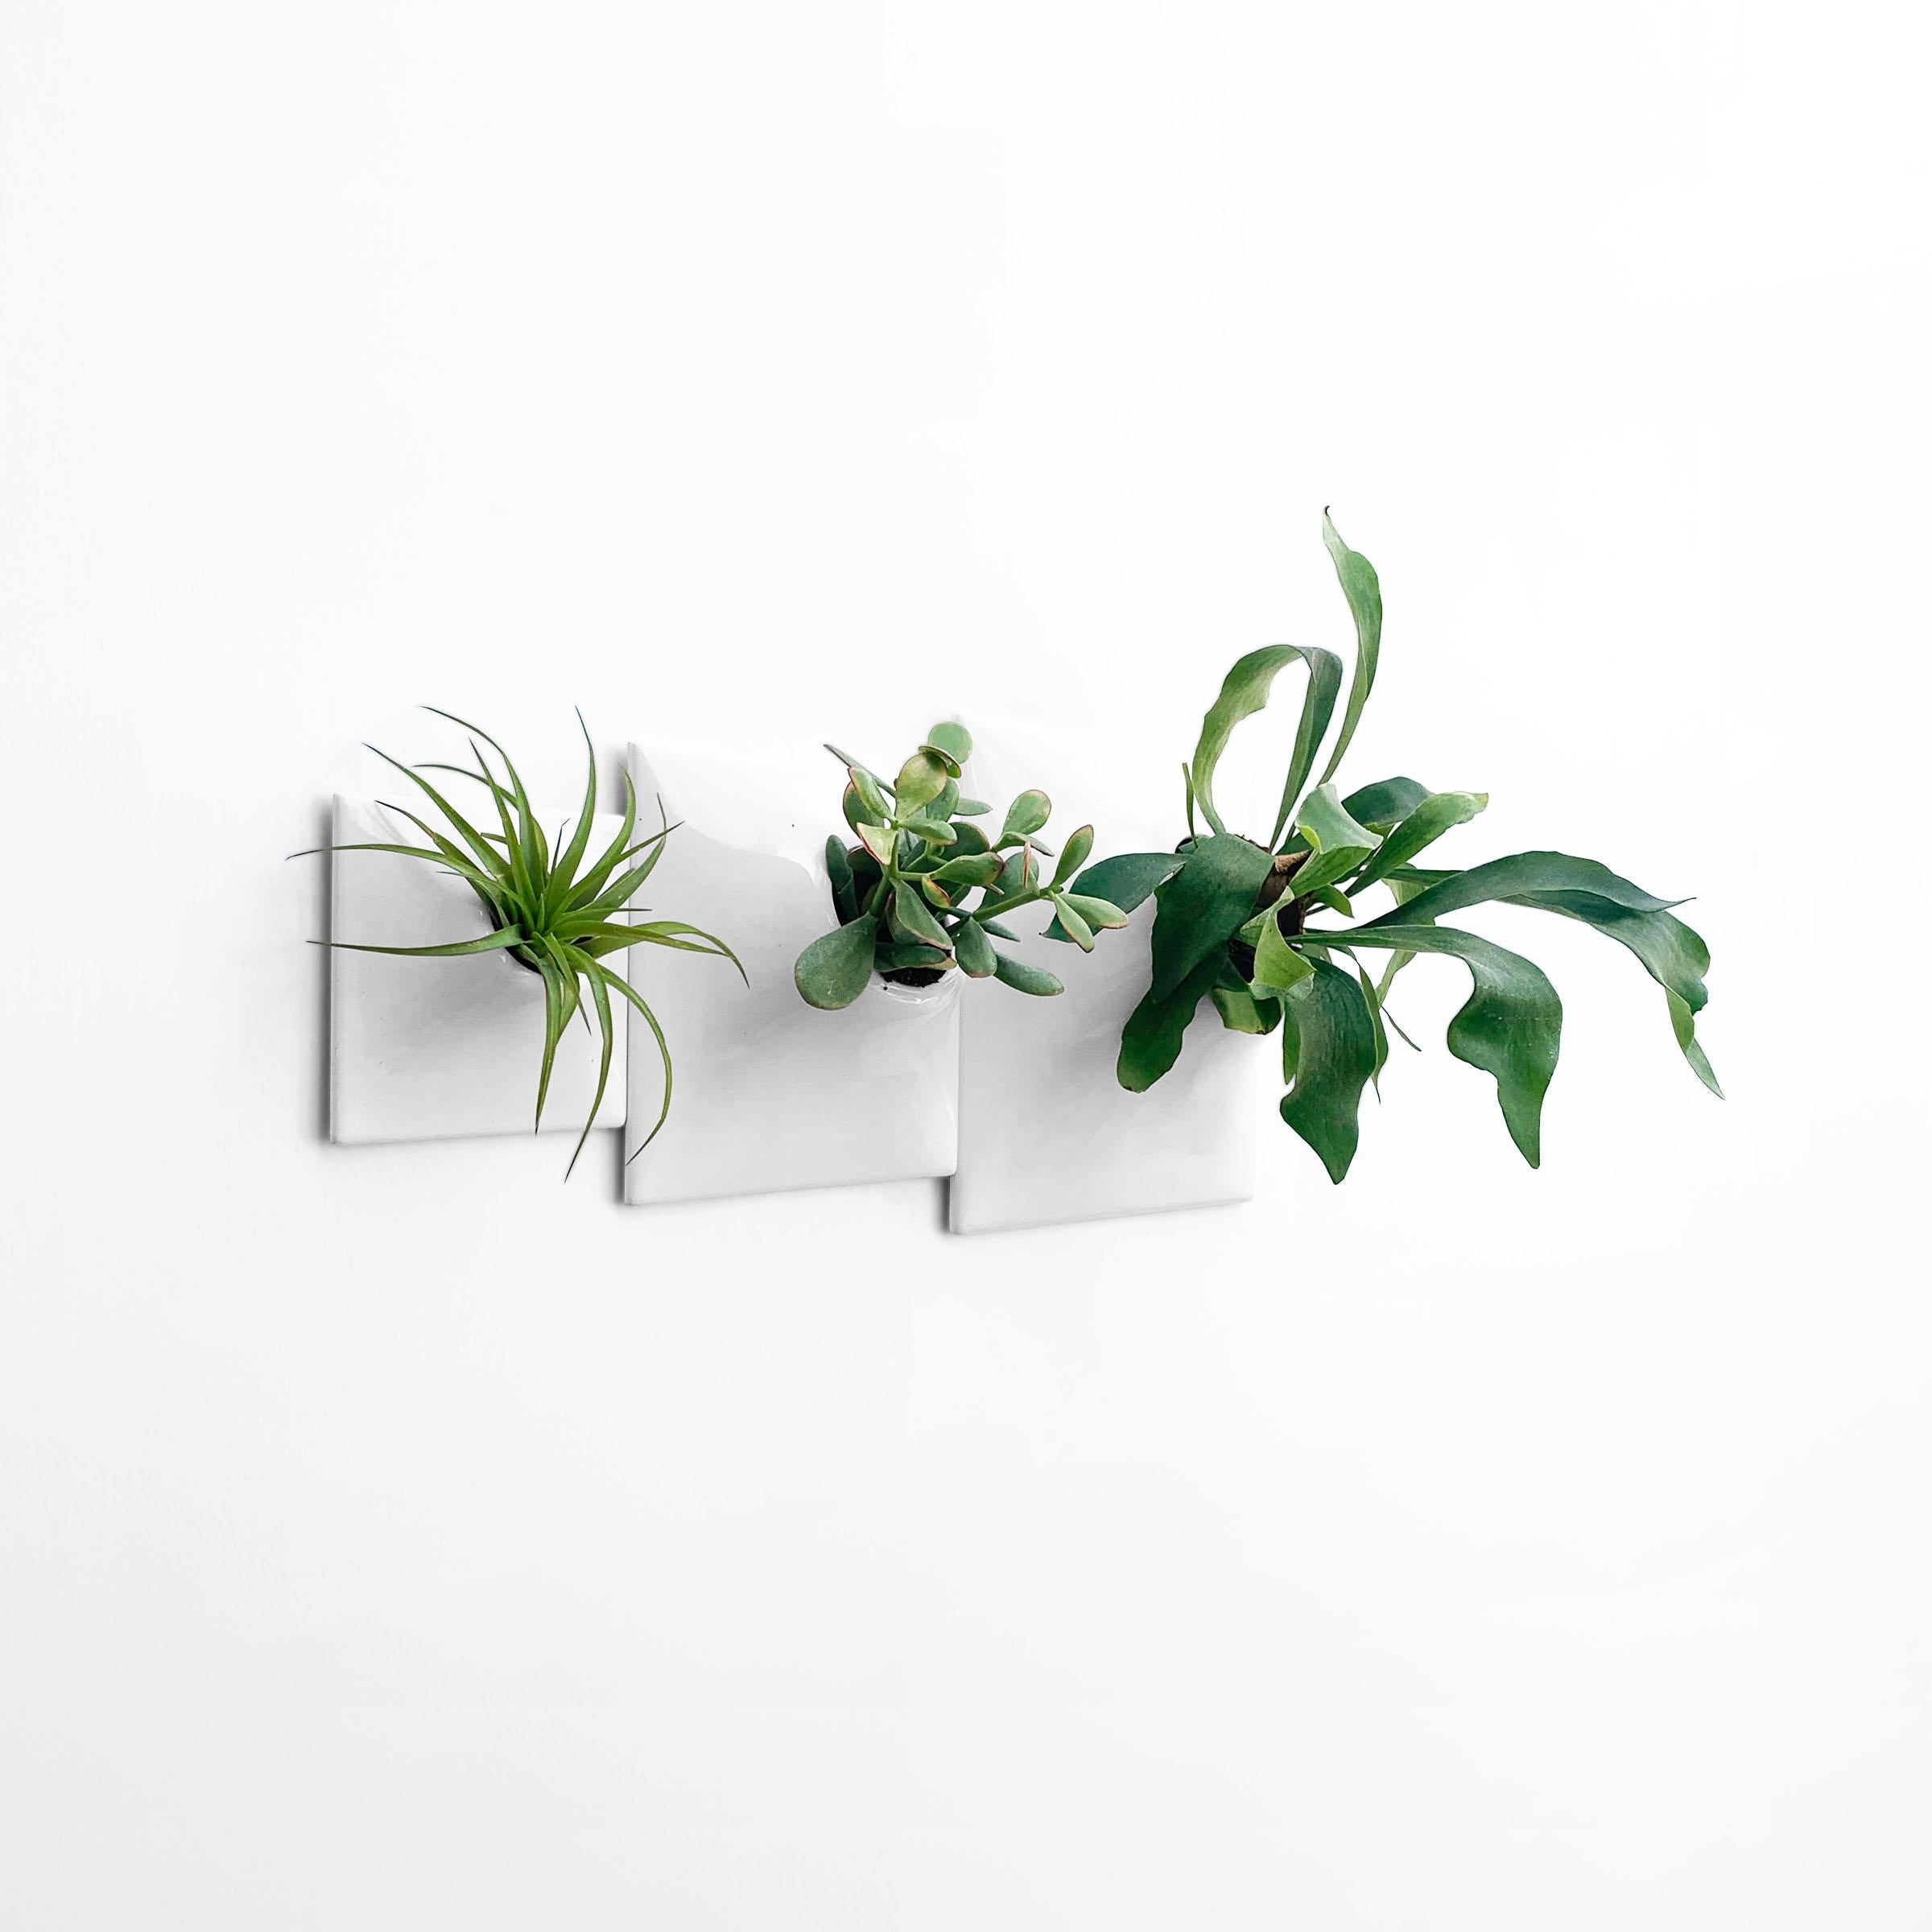 Modern Wall Planter Set, Plant Wall Art, Vertical Garden, Wall Decor, Node TP

Artfully arrange a dynamic and intriguing modular plant wall or moss wall with this set of three Node wall planters, available in five neutral glaze colors.  Create an